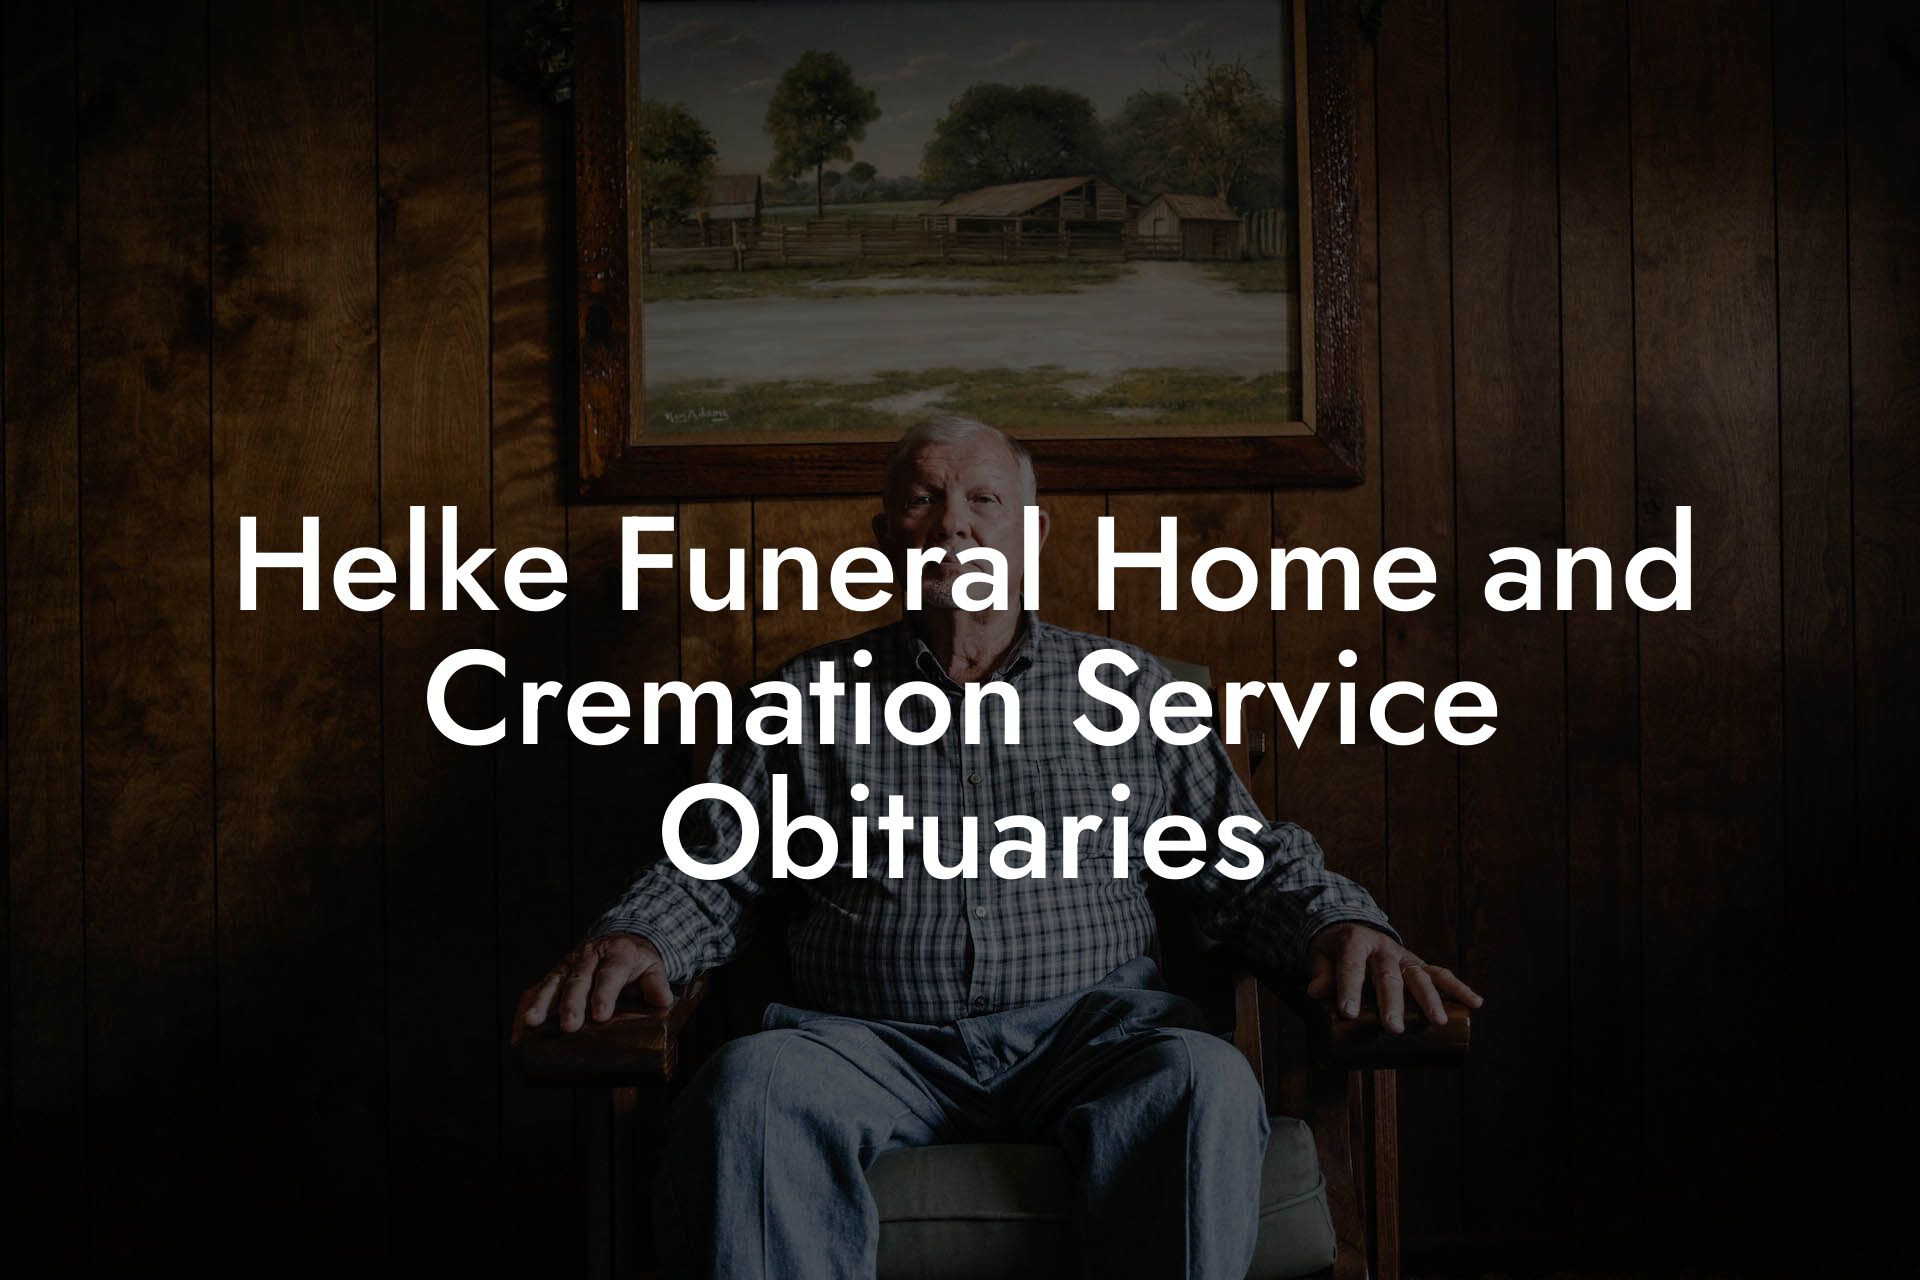 Helke Funeral Home and Cremation Service Obituaries